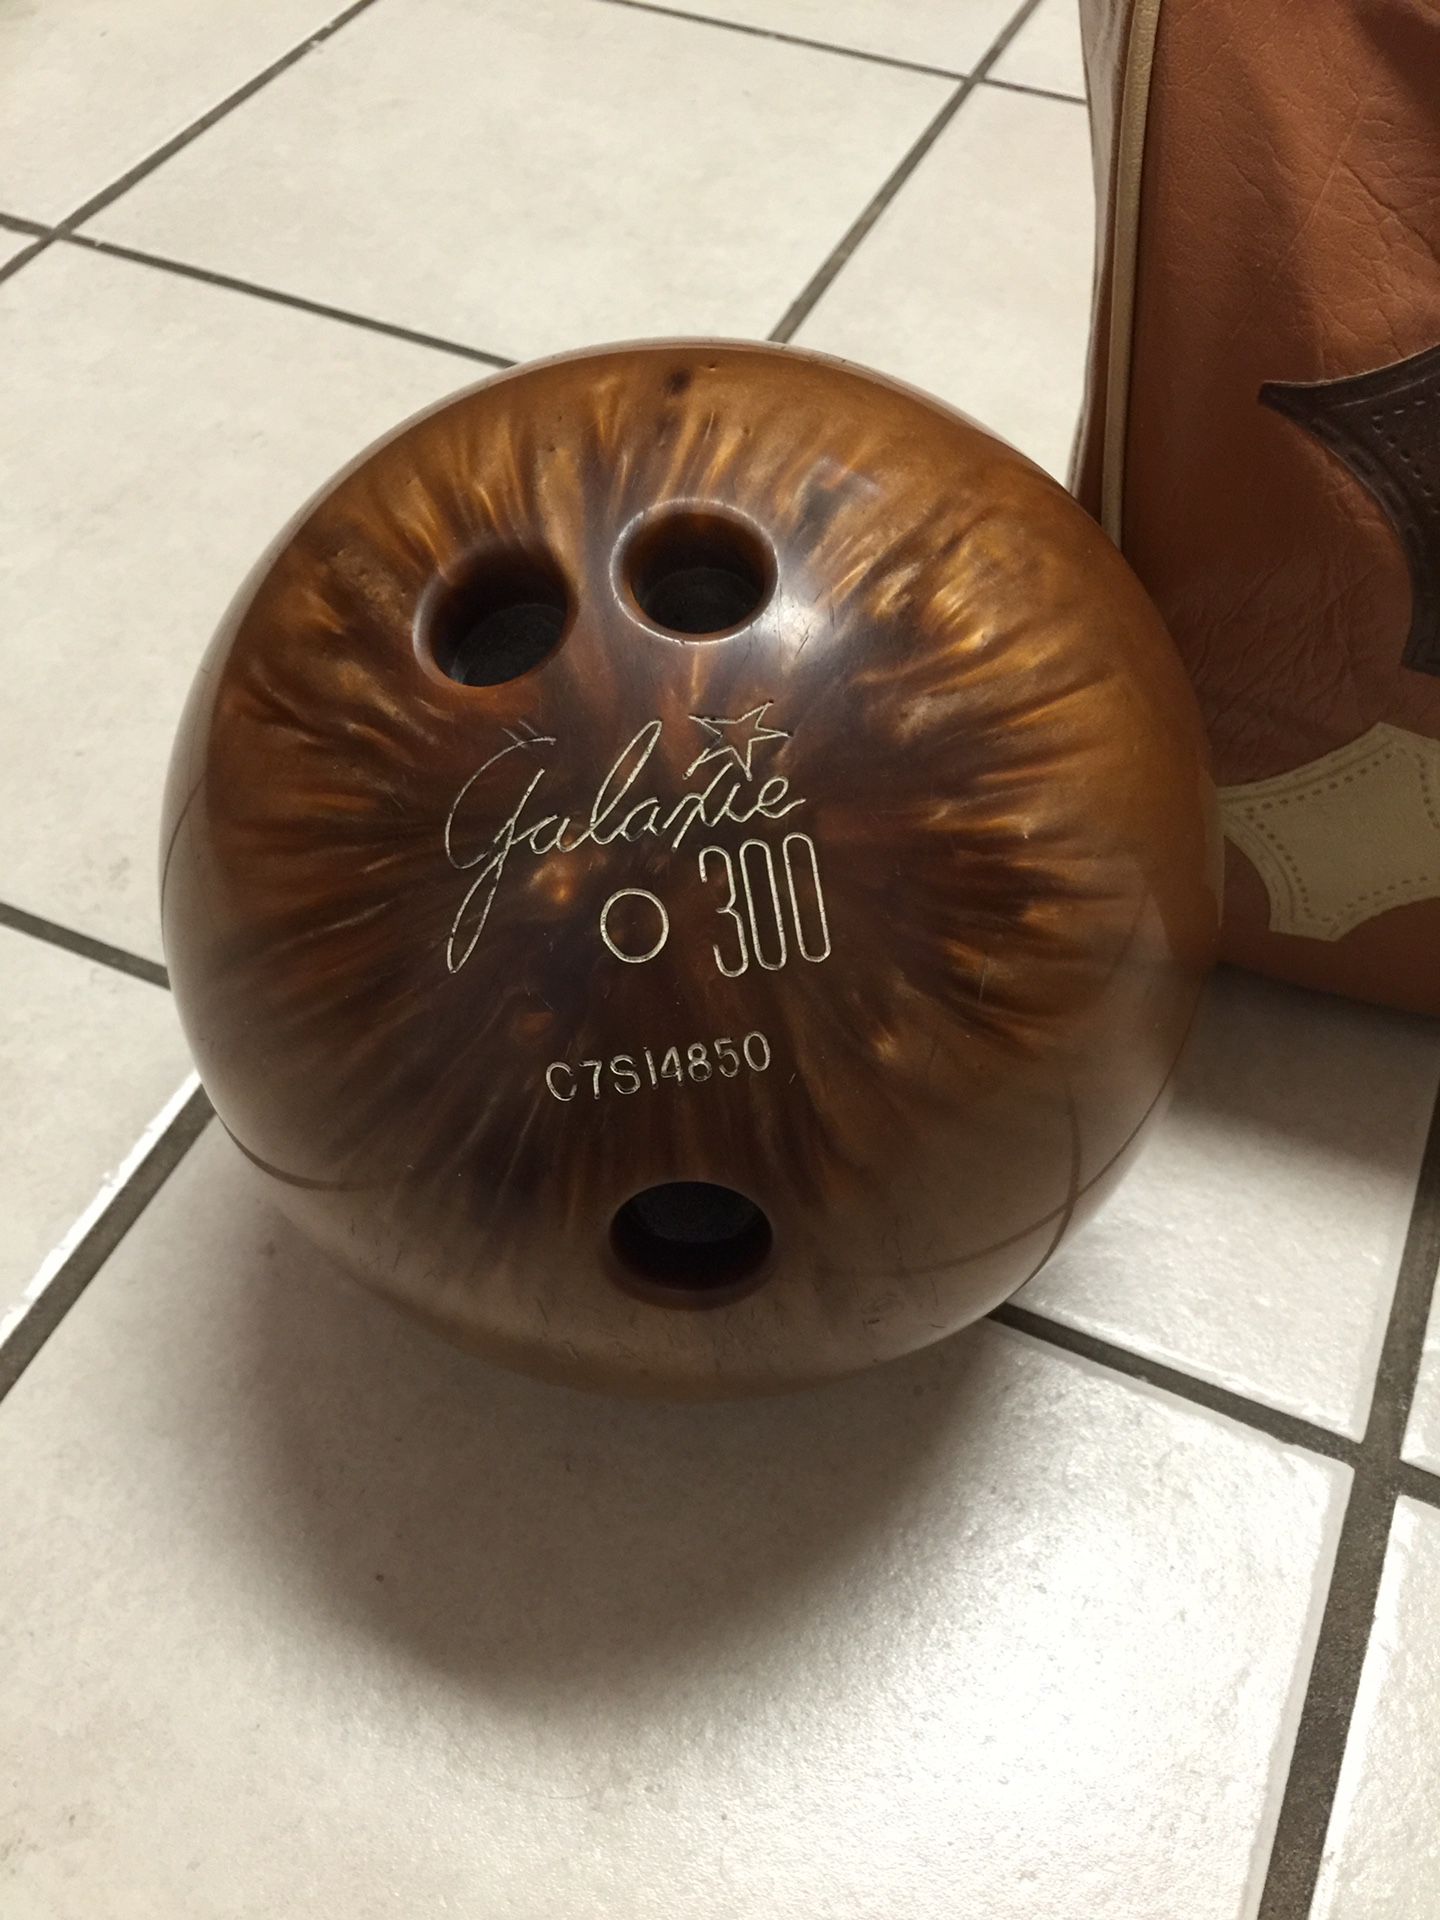 Vintage AJAY Bowling Ball Bag Brown Tan with Ball Rack for Sale in  Victorville, CA - OfferUp